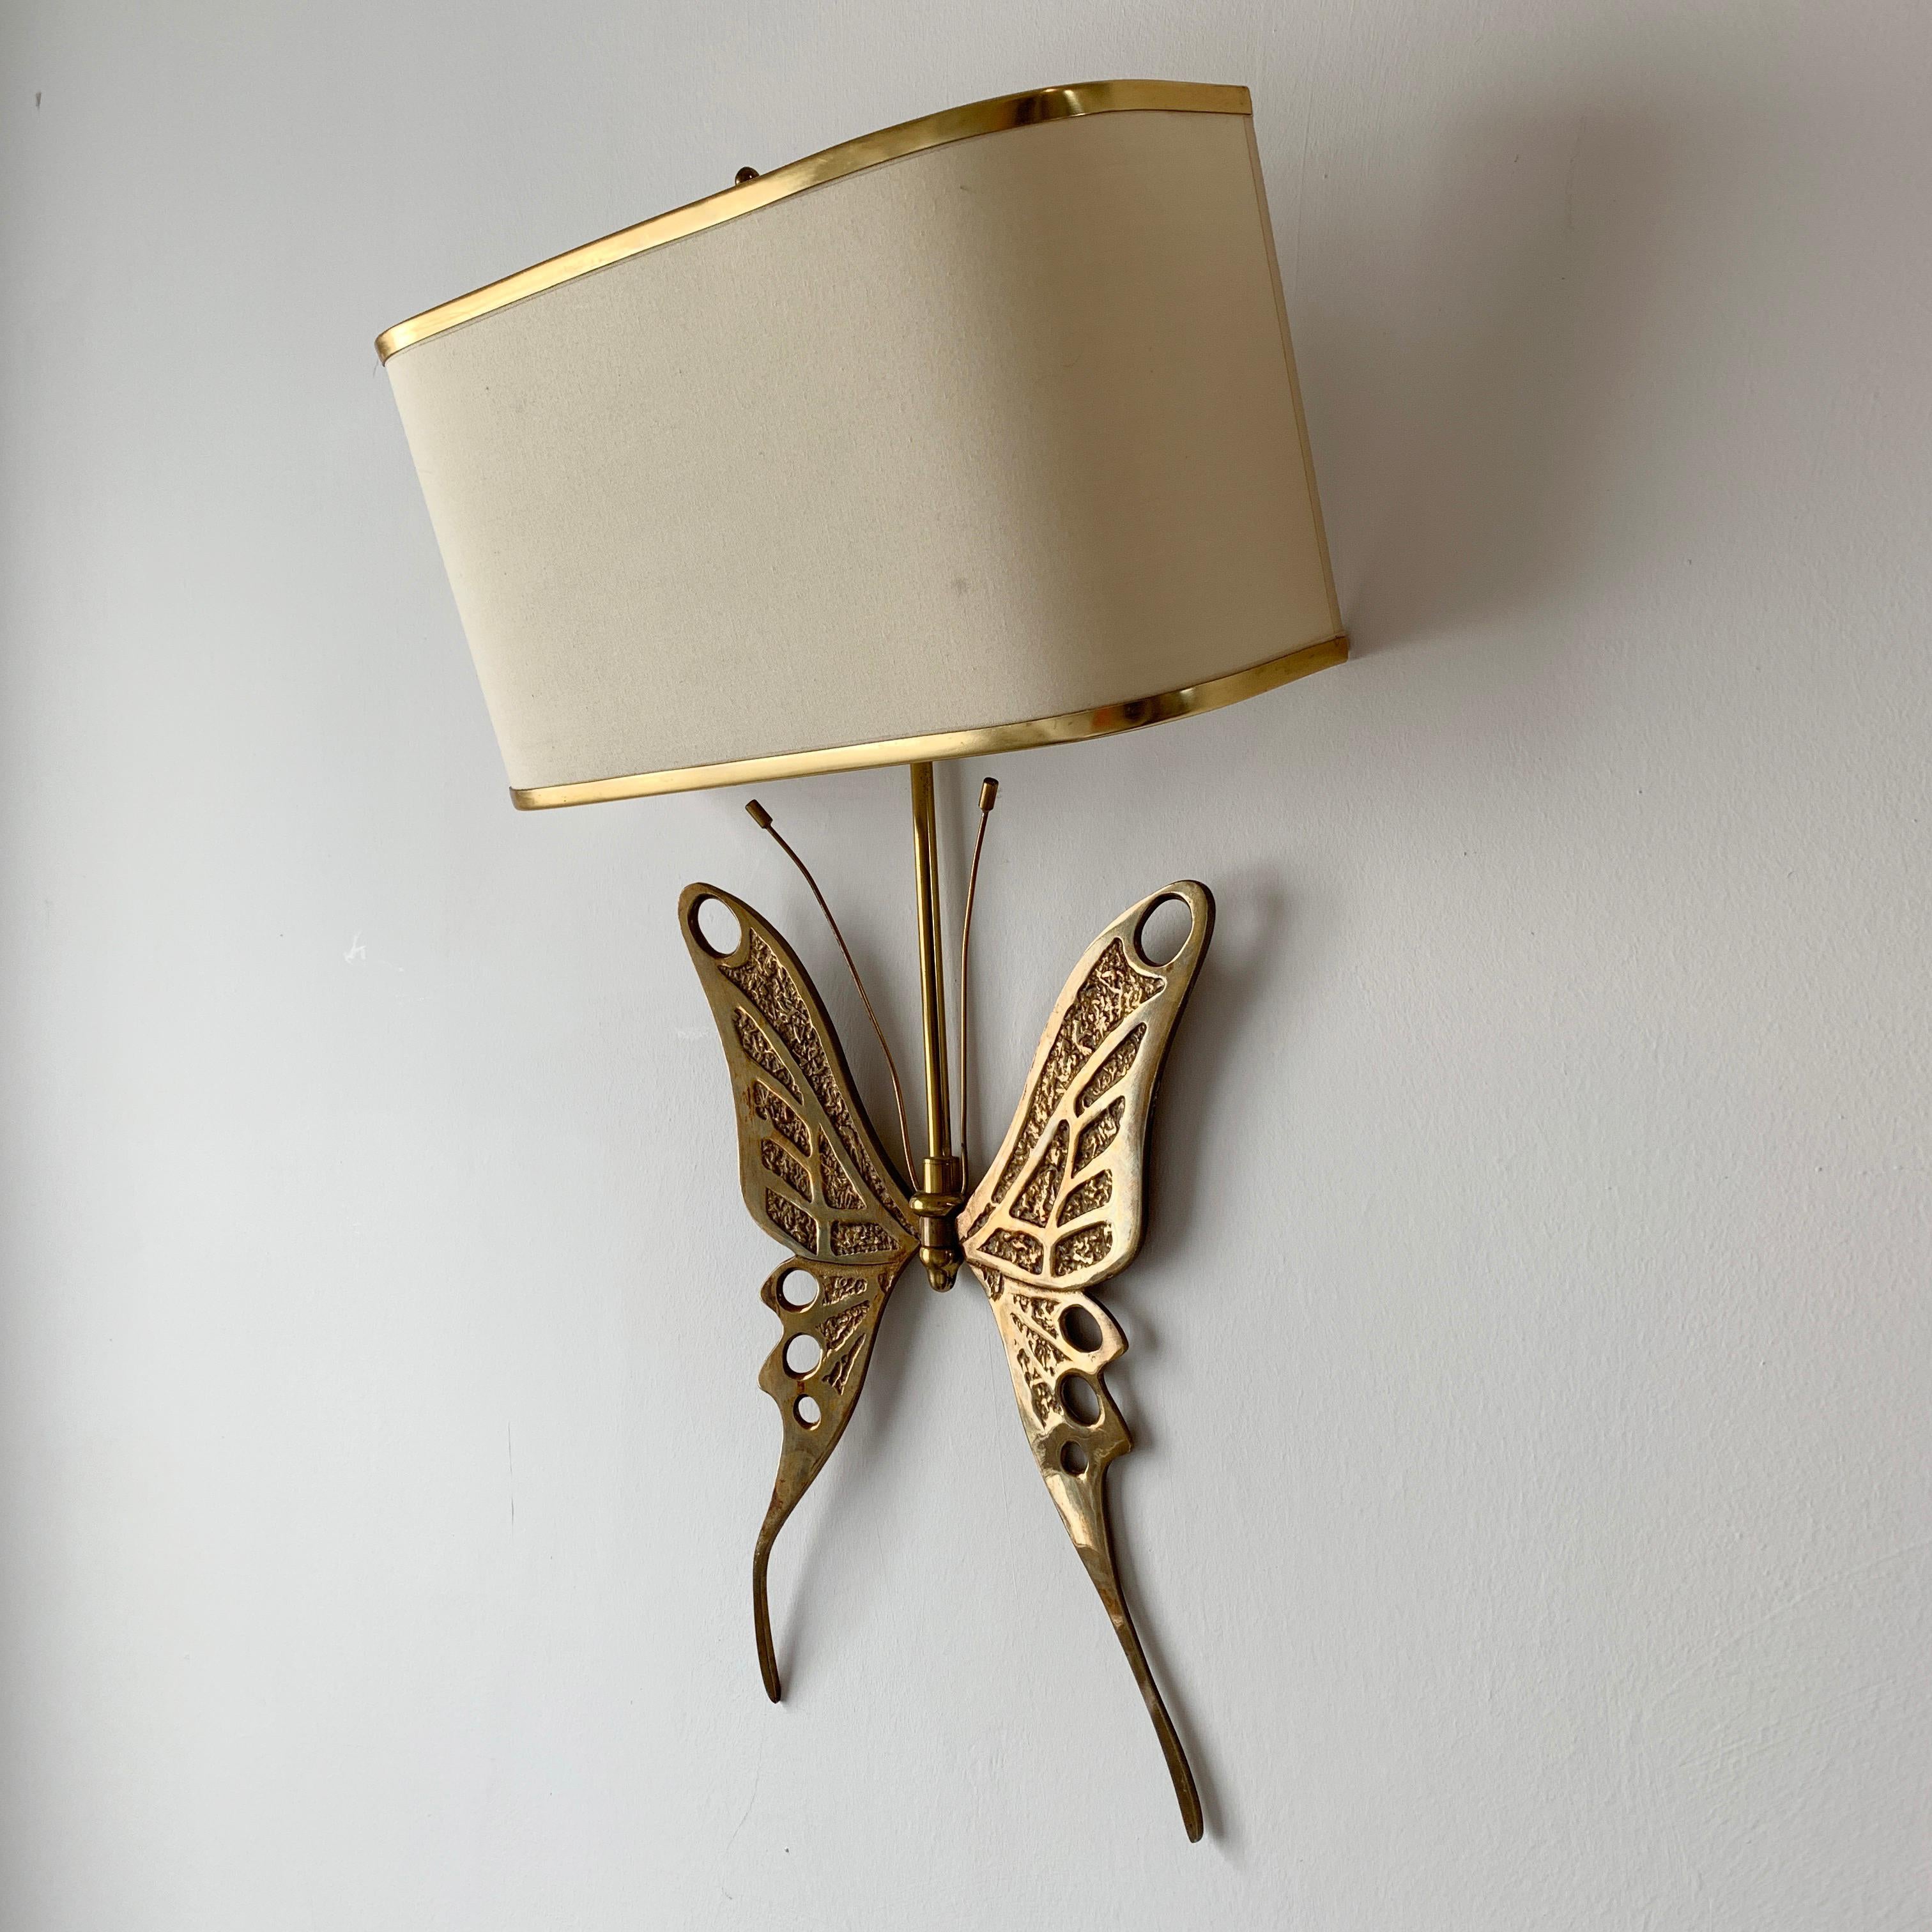 Midcentury brass butterfly wall sconce
Beautiful handcut and crafted brass butterfly in brass
The lamp has a demi shade in off-white with gilt colour trim top and bottom
Att to Willy Daro
The lamp takes 2 bayonet b27 bulbs
Measures: 55cm height,